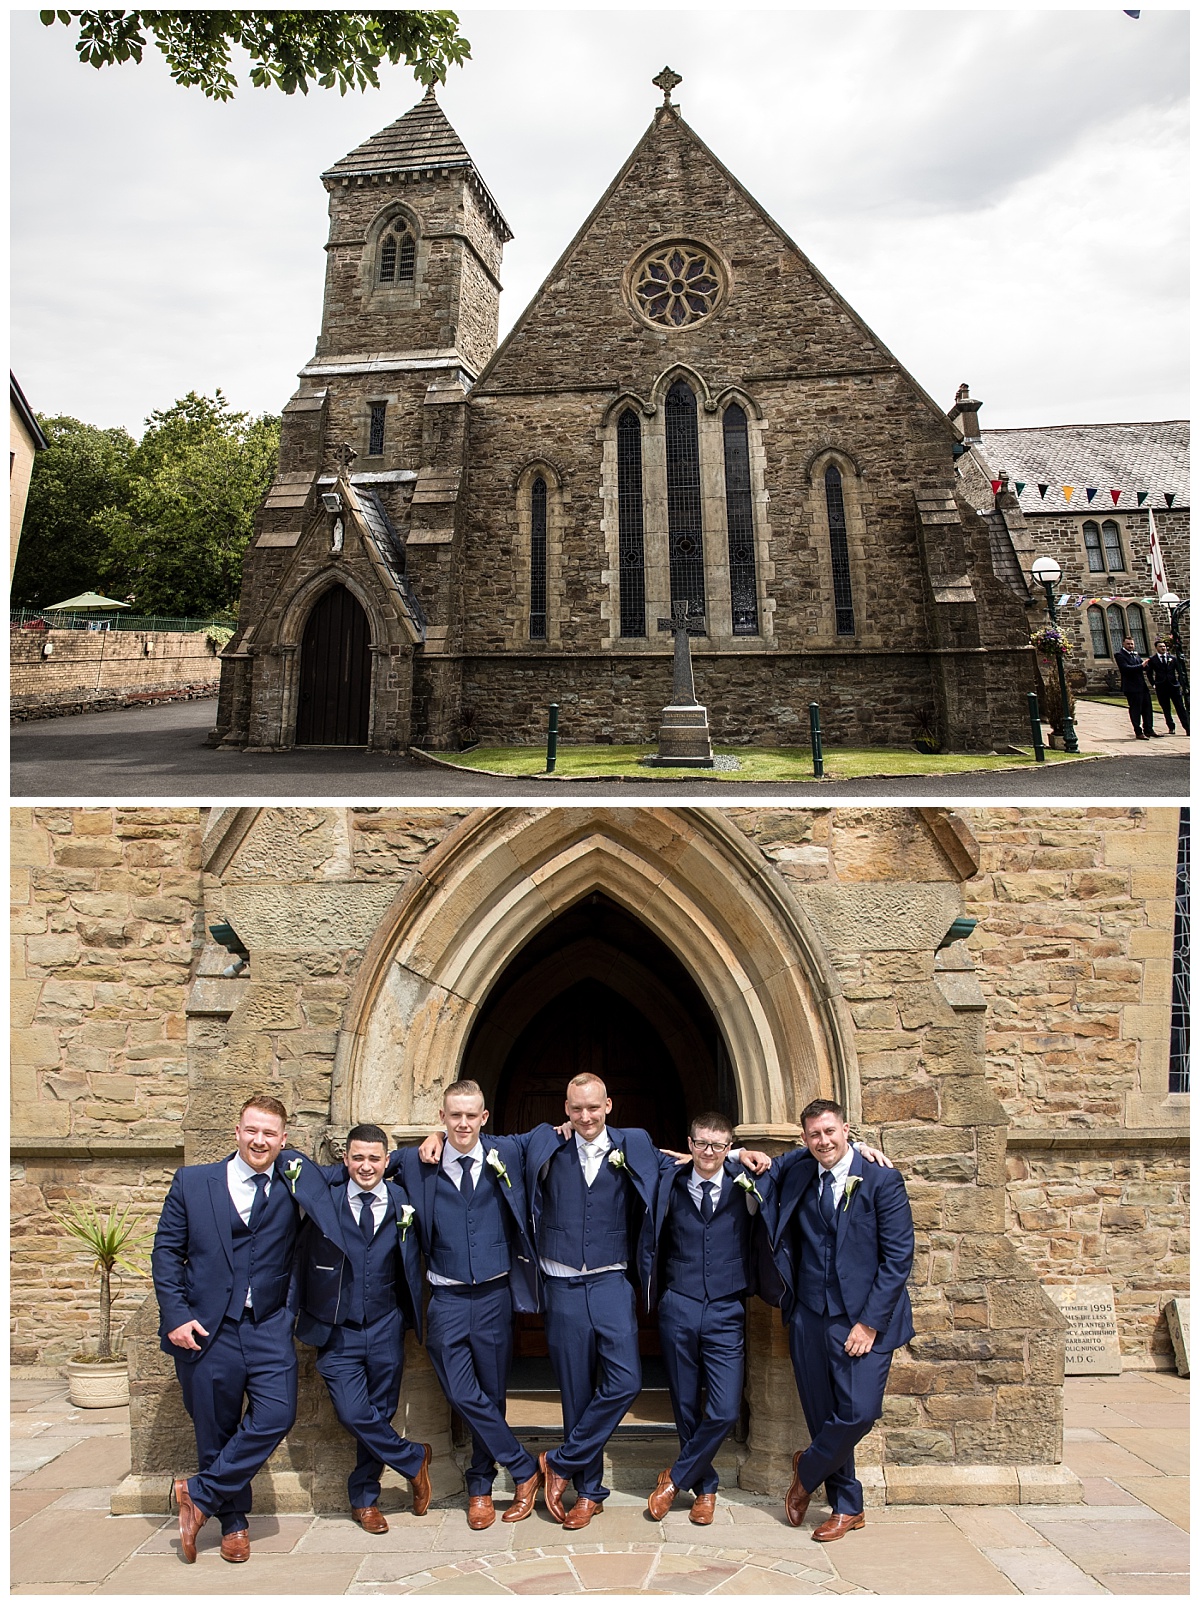 Wedding Photography Manchester - Victoria and Phillips Shireburn Arms wedding 19